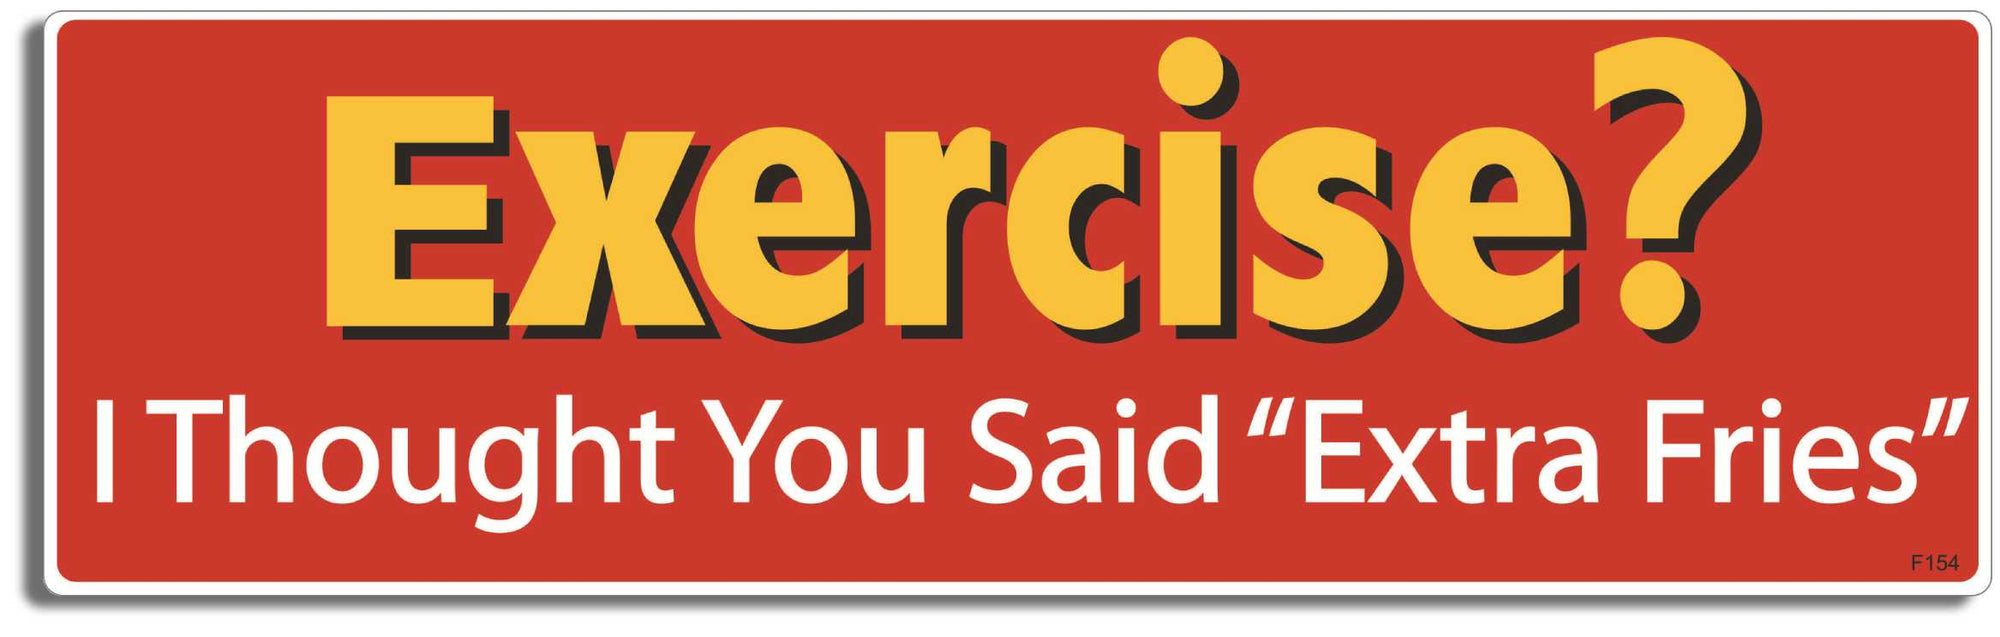 Exercise? I thought you said 'Extra Fries' - 3" x 10" Bumper Sticker--Car Magnet- -  Decal Bumper Sticker-funny Bumper Sticker Car Magnet Exercise? I thought you said 'Extra fries'-  Decal for carsexercise, Fat, lazy